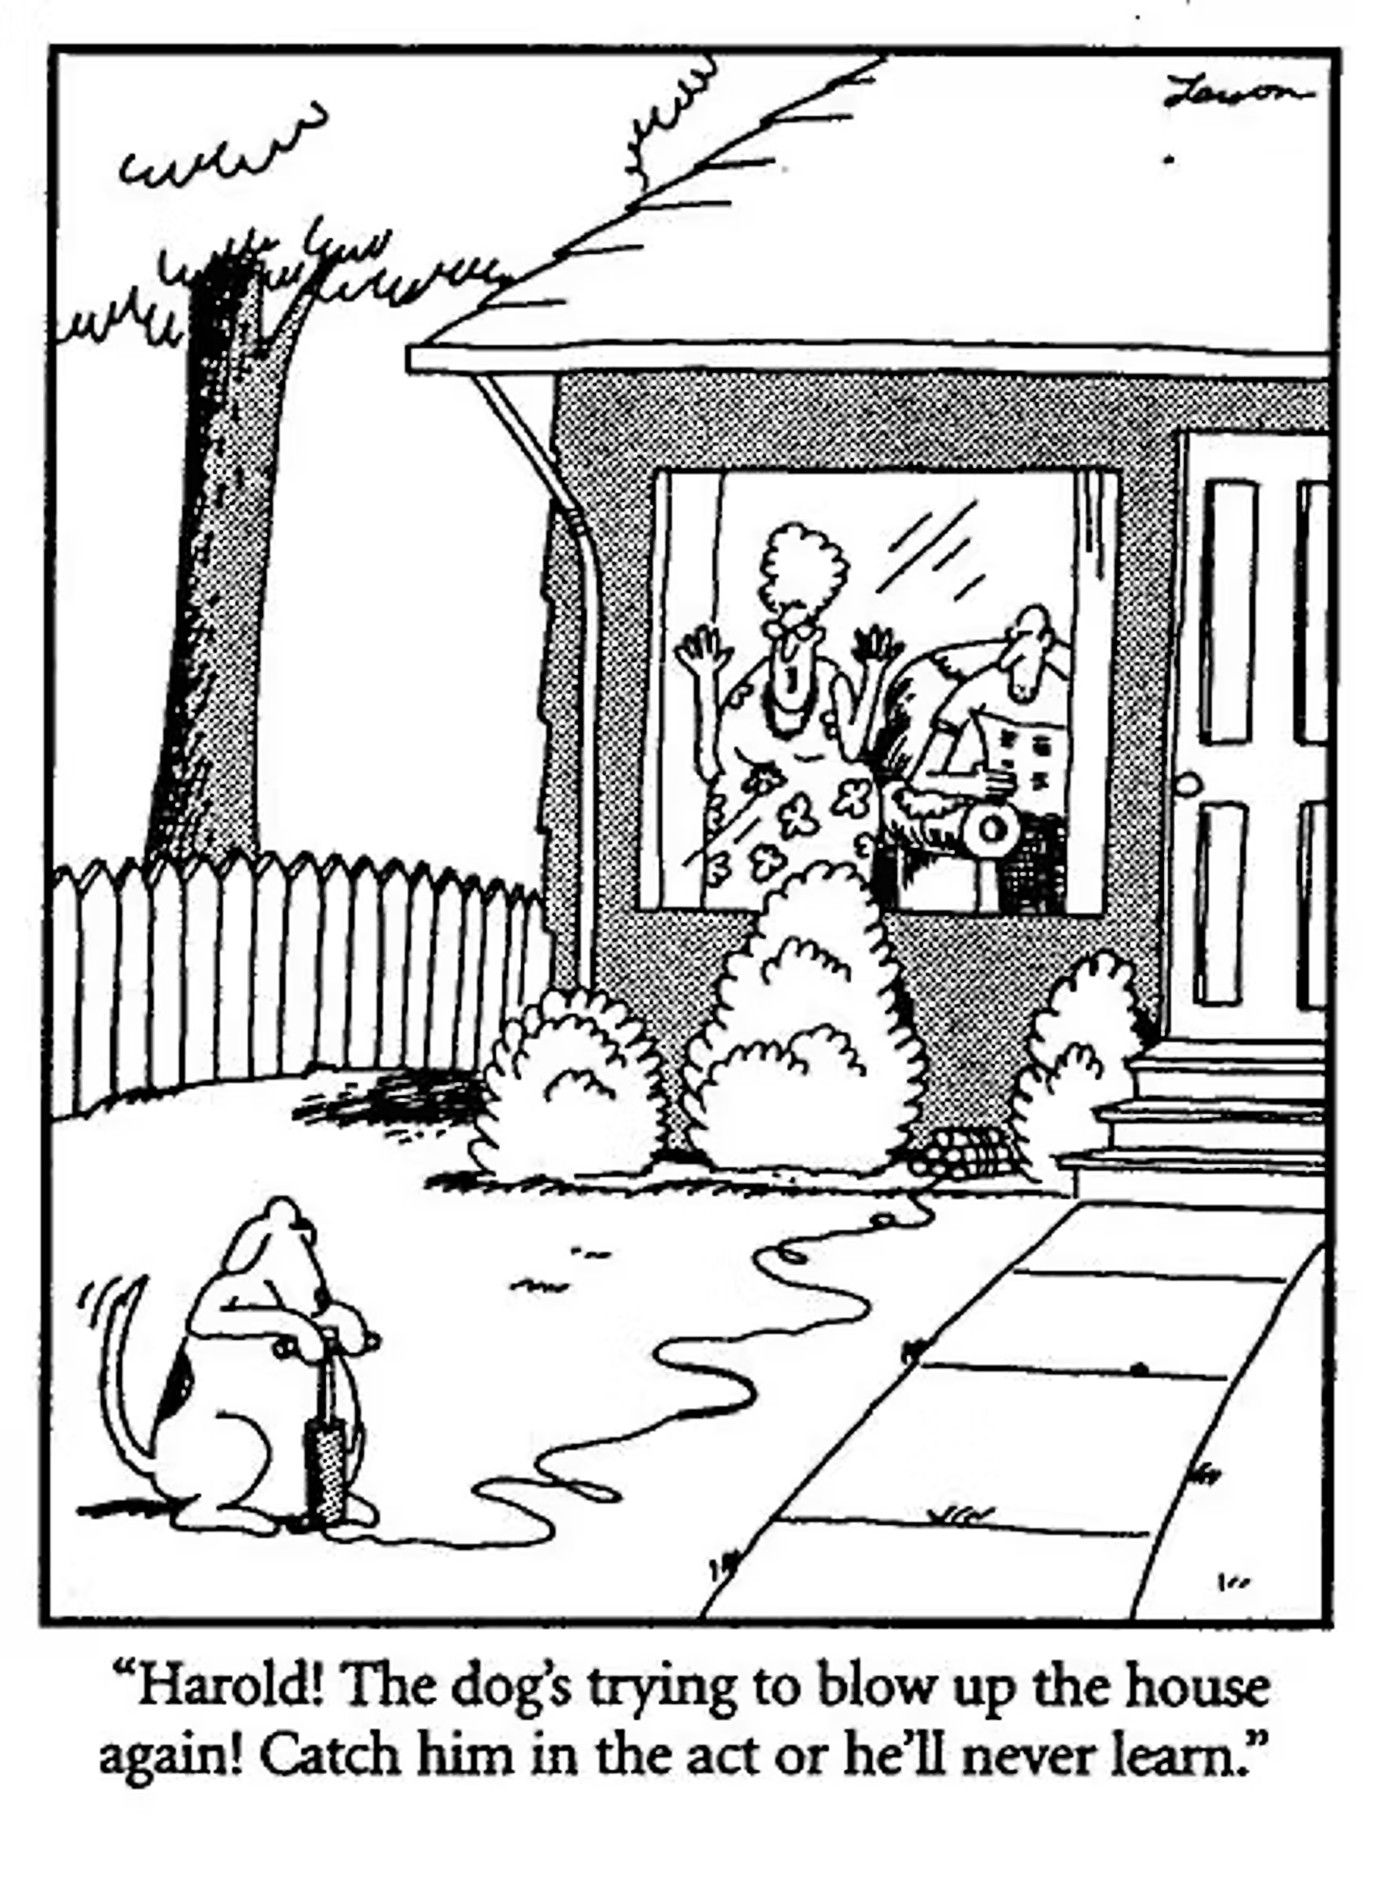 Far Side, "Harold! The dog's trying to blow up the house again!"